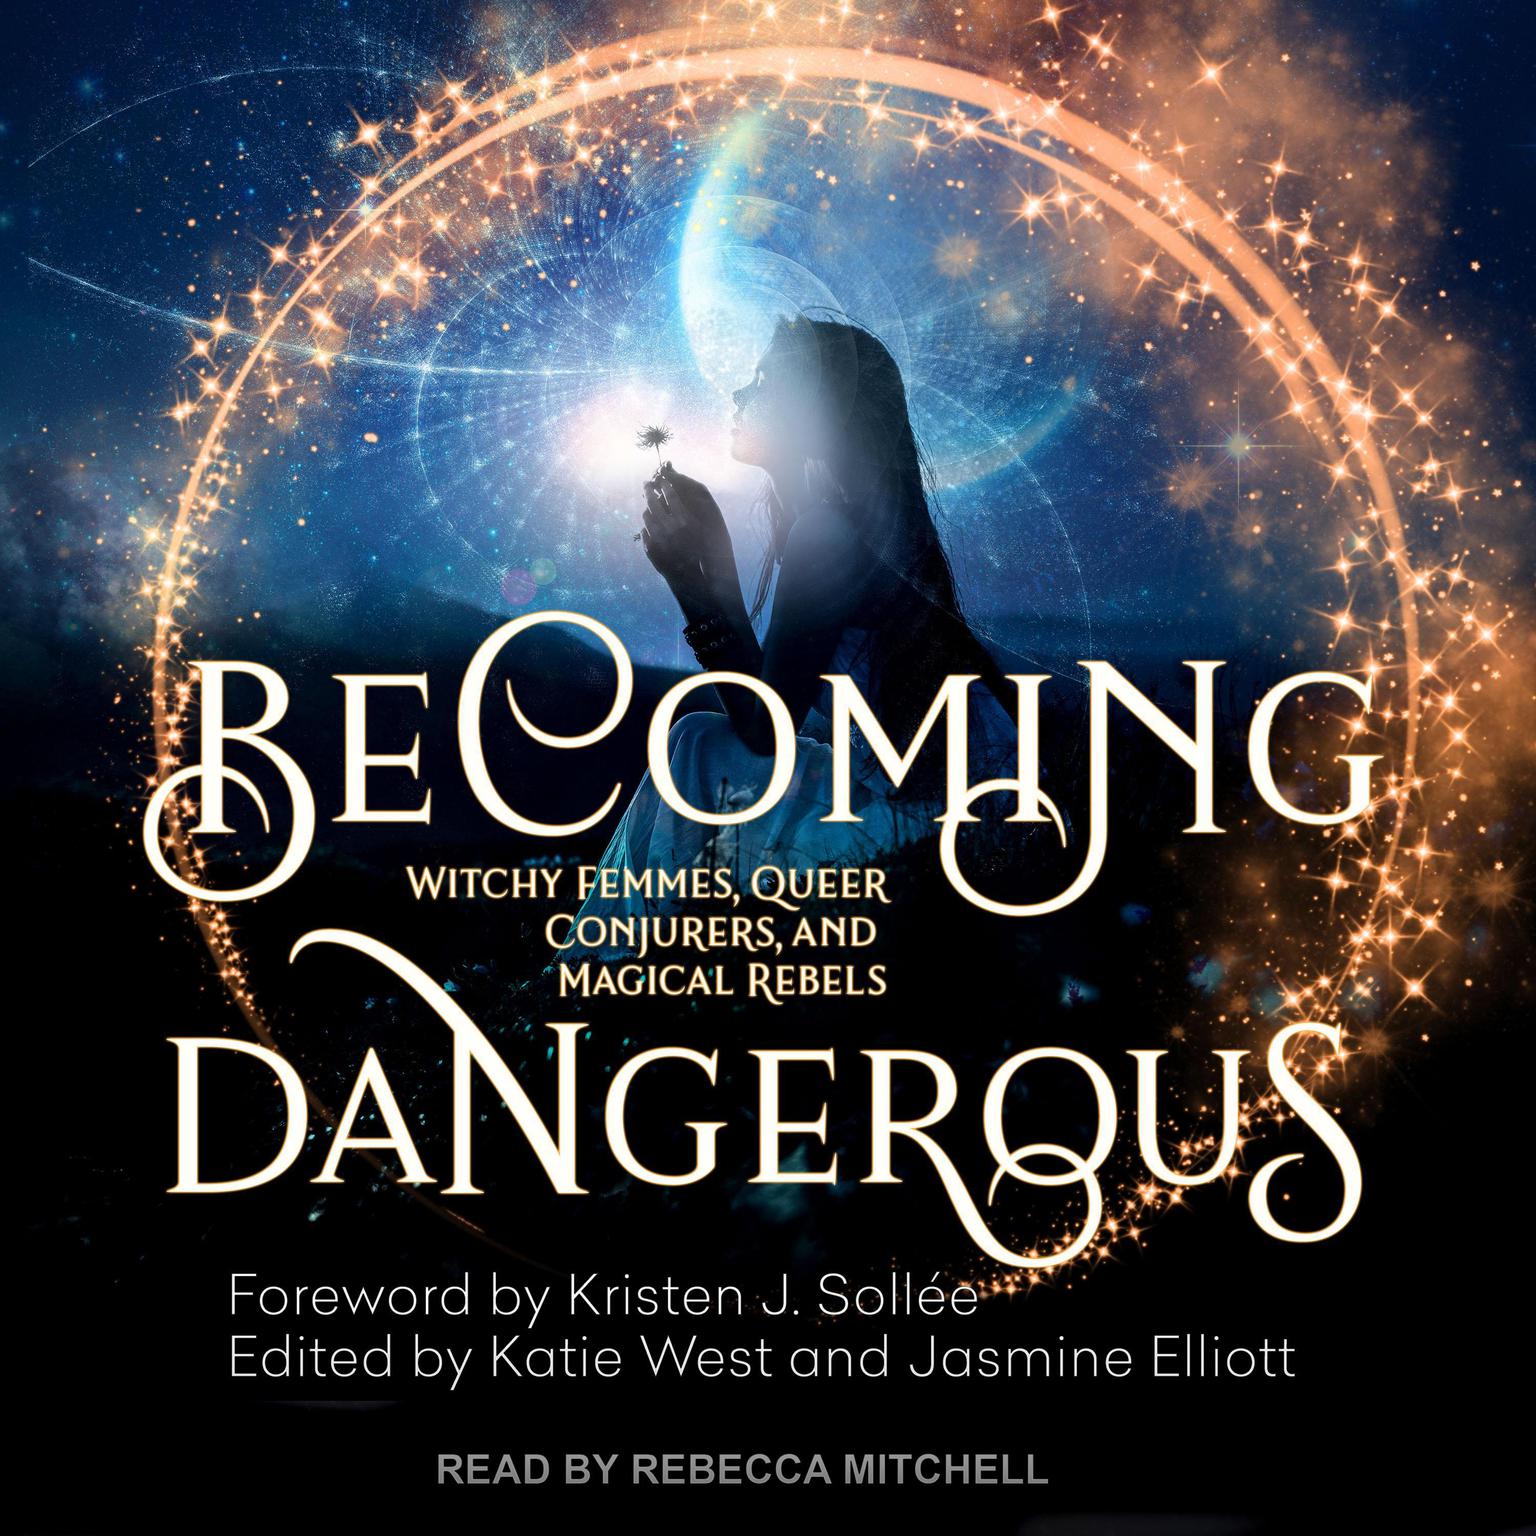 Becoming Dangerous: Witchy Femmes, Queer Conjurers, and Magical Rebels Audiobook, by Jasmine Elliott